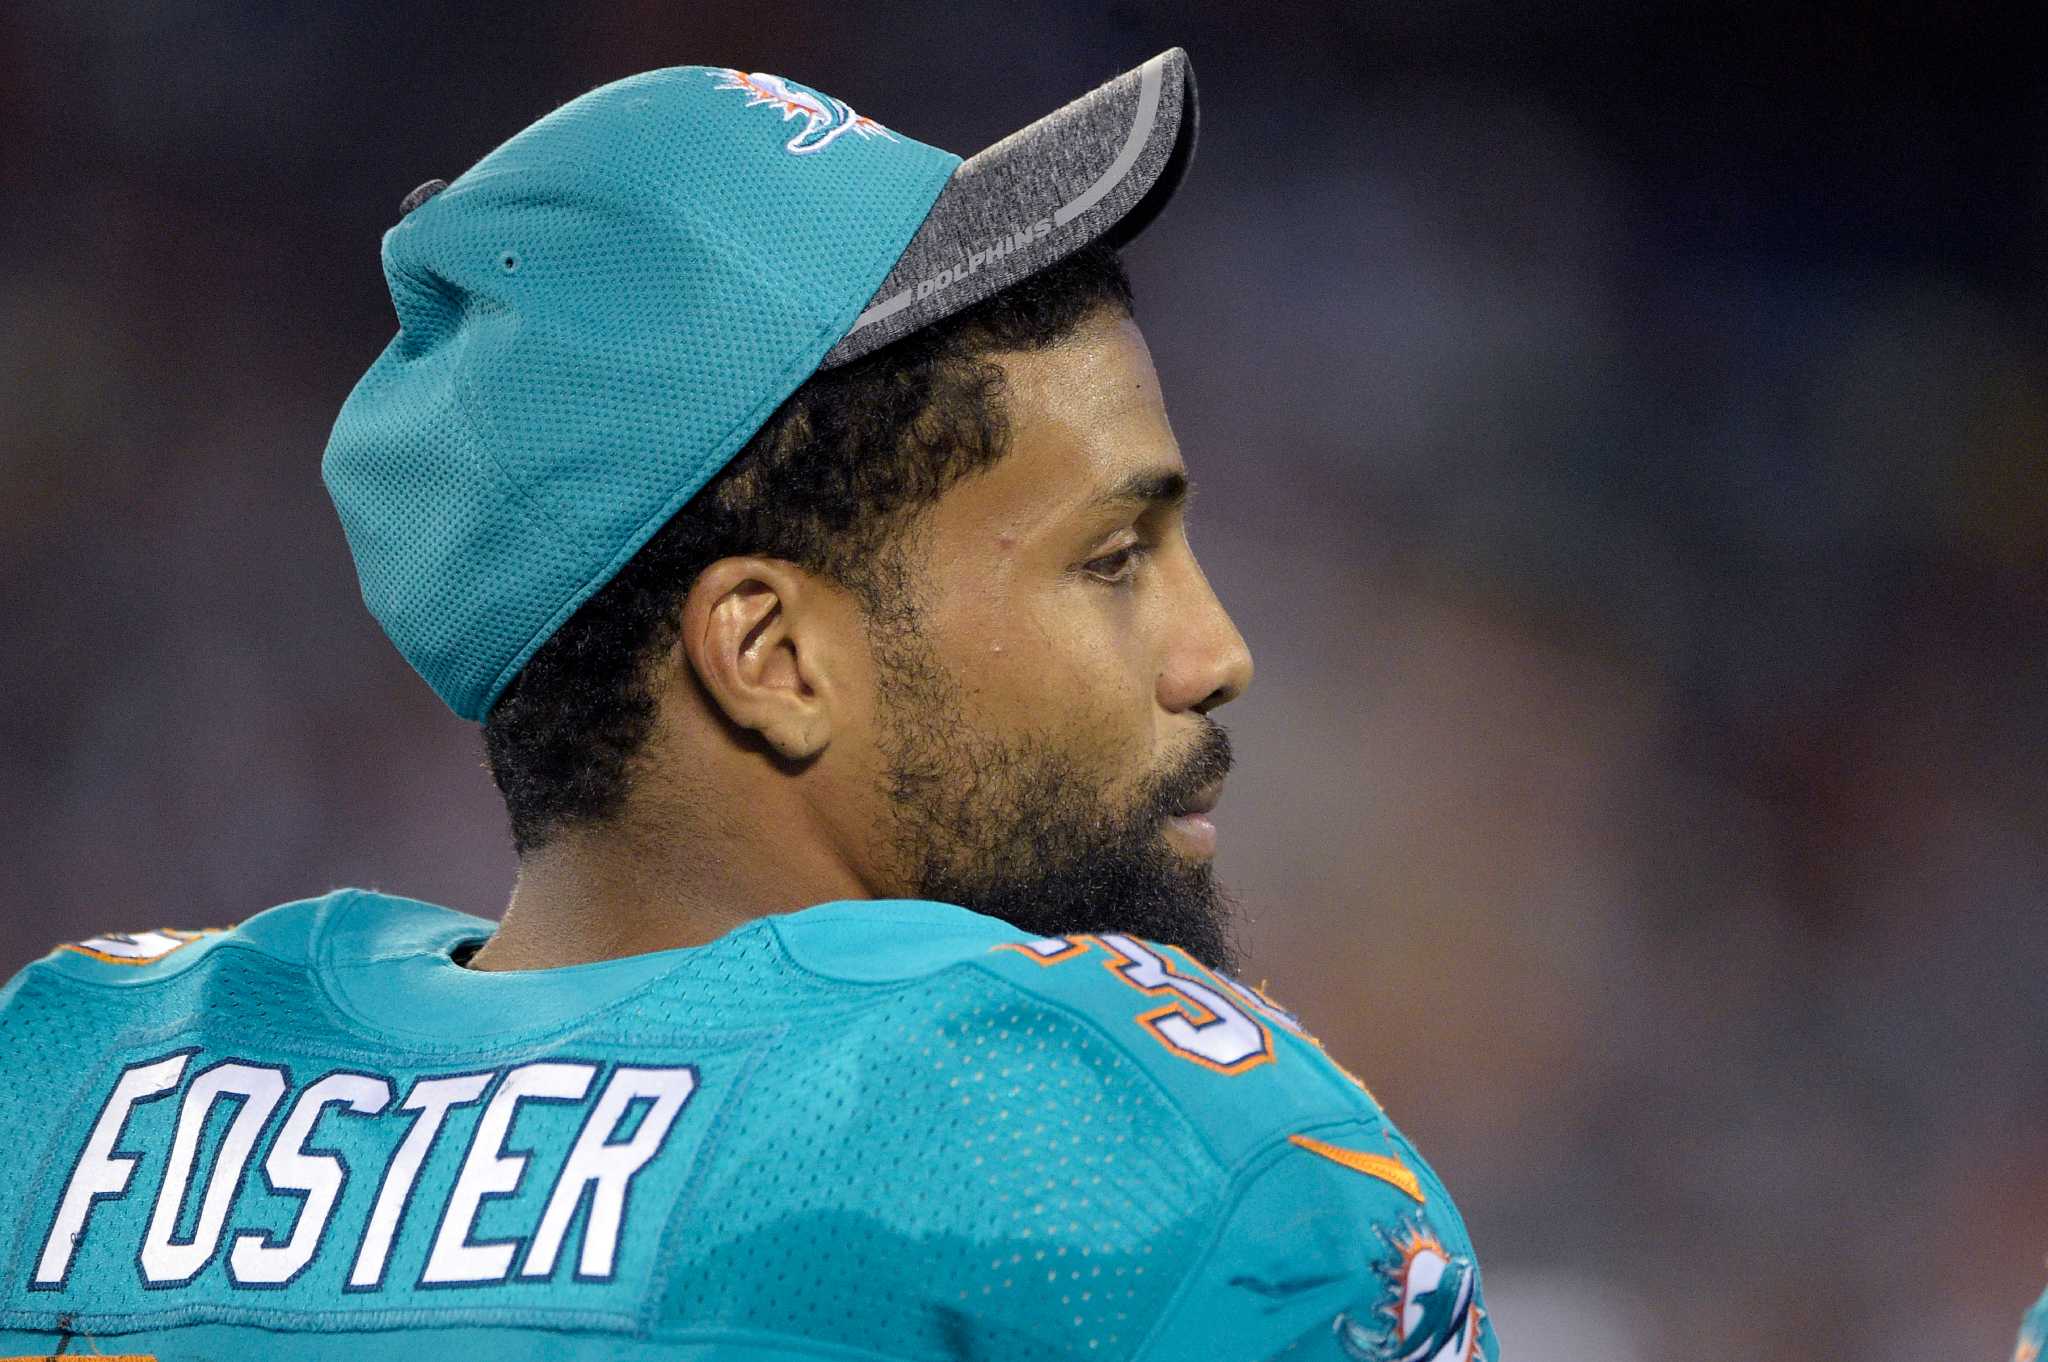 Former Texans star Arian Foster retires from NFL after 8 seasons